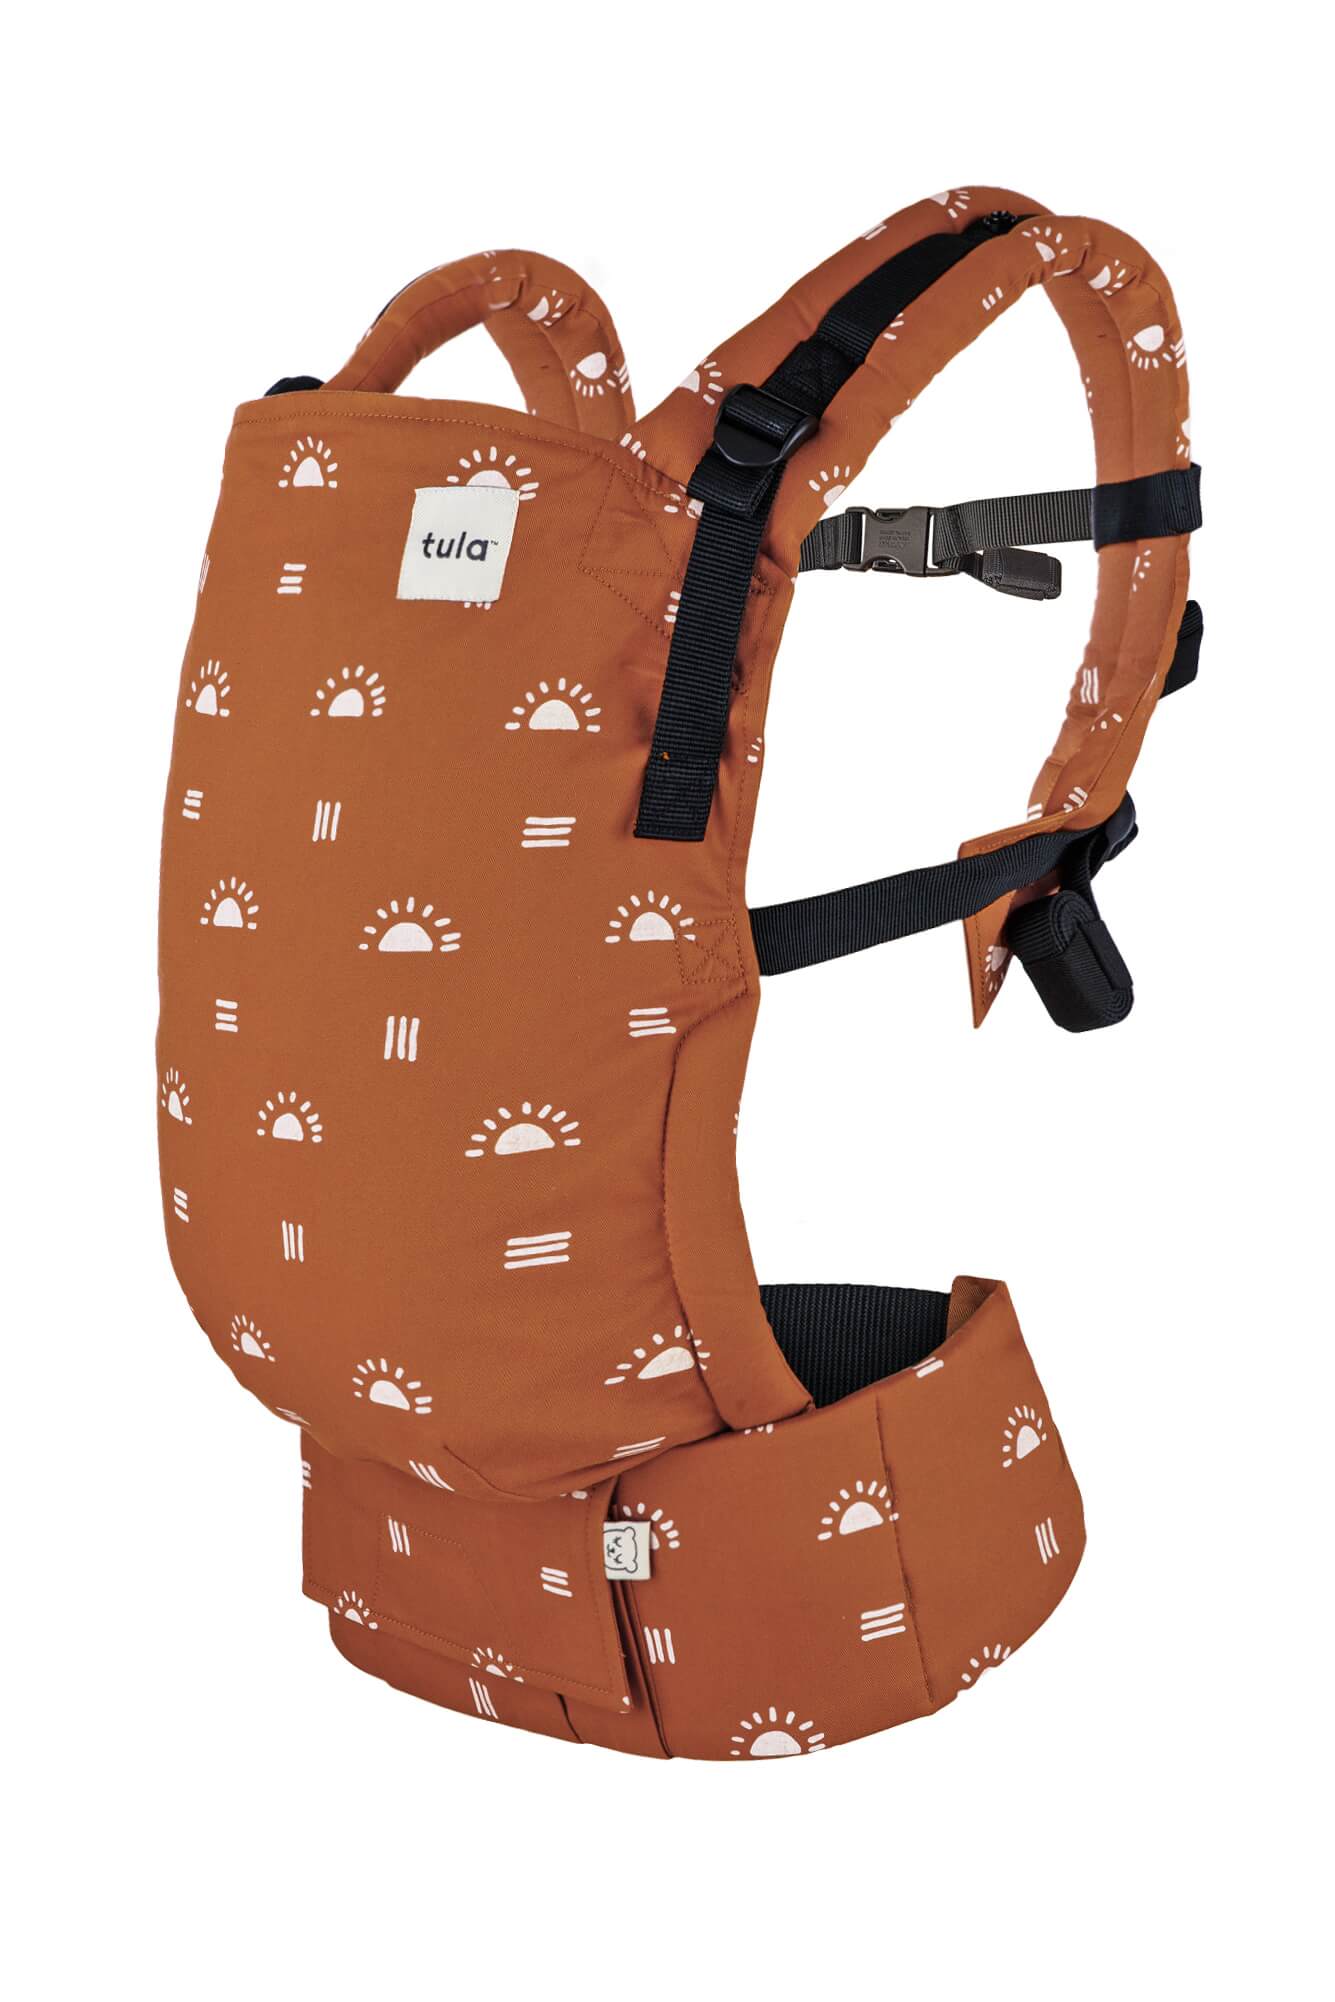 Sedona - Cotton Free-to-Grow Baby Carrier